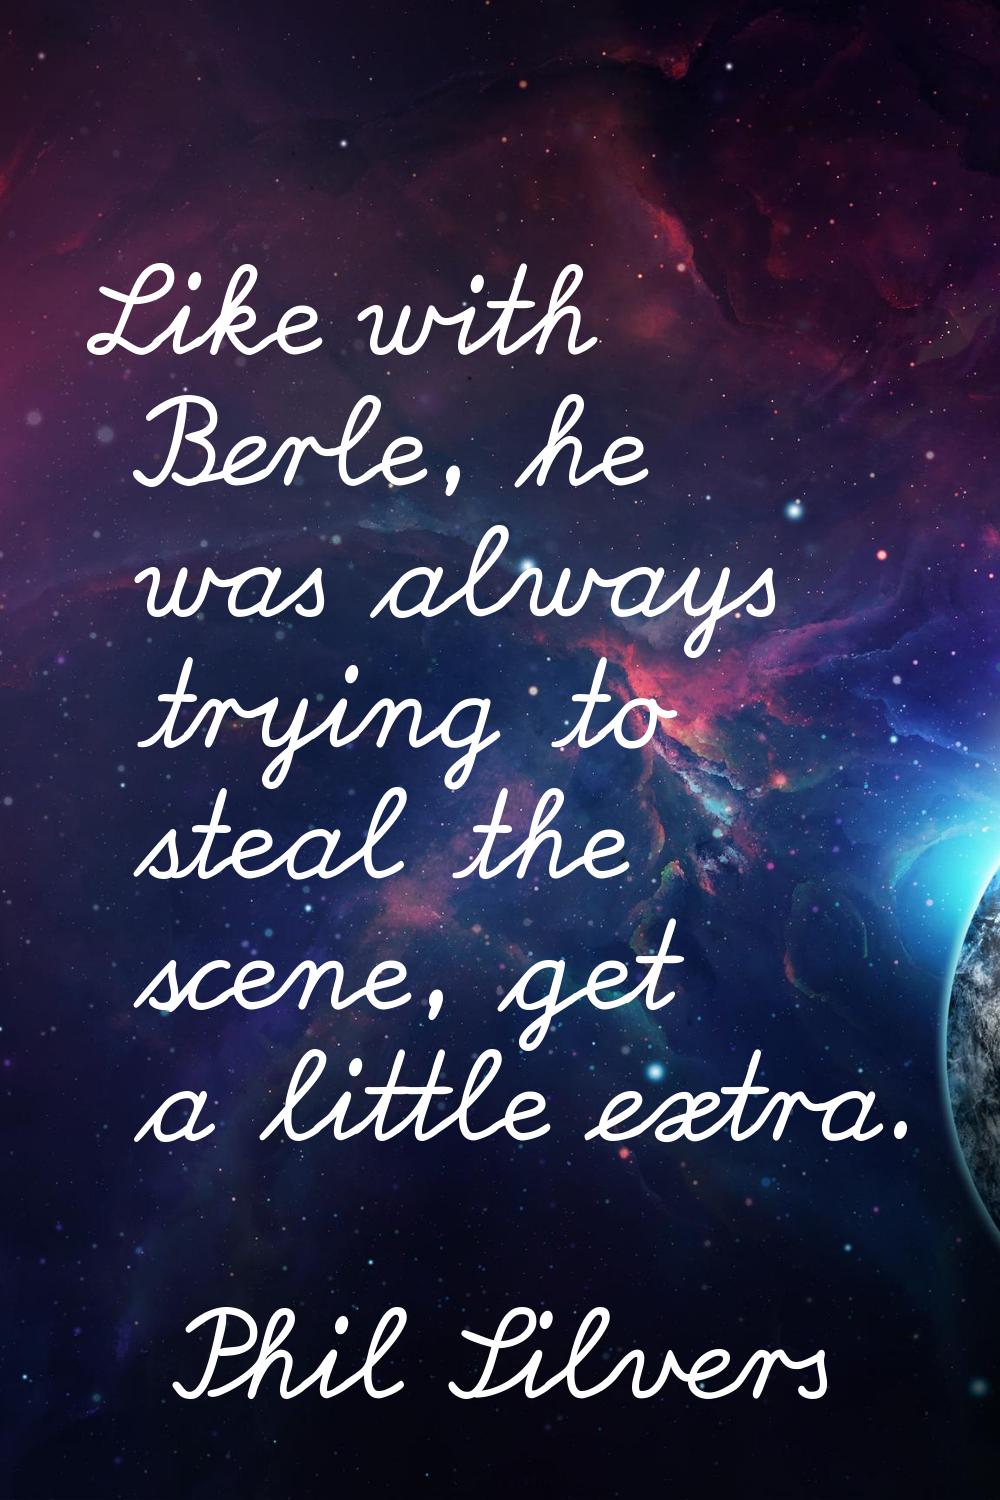 Like with Berle, he was always trying to steal the scene, get a little extra.